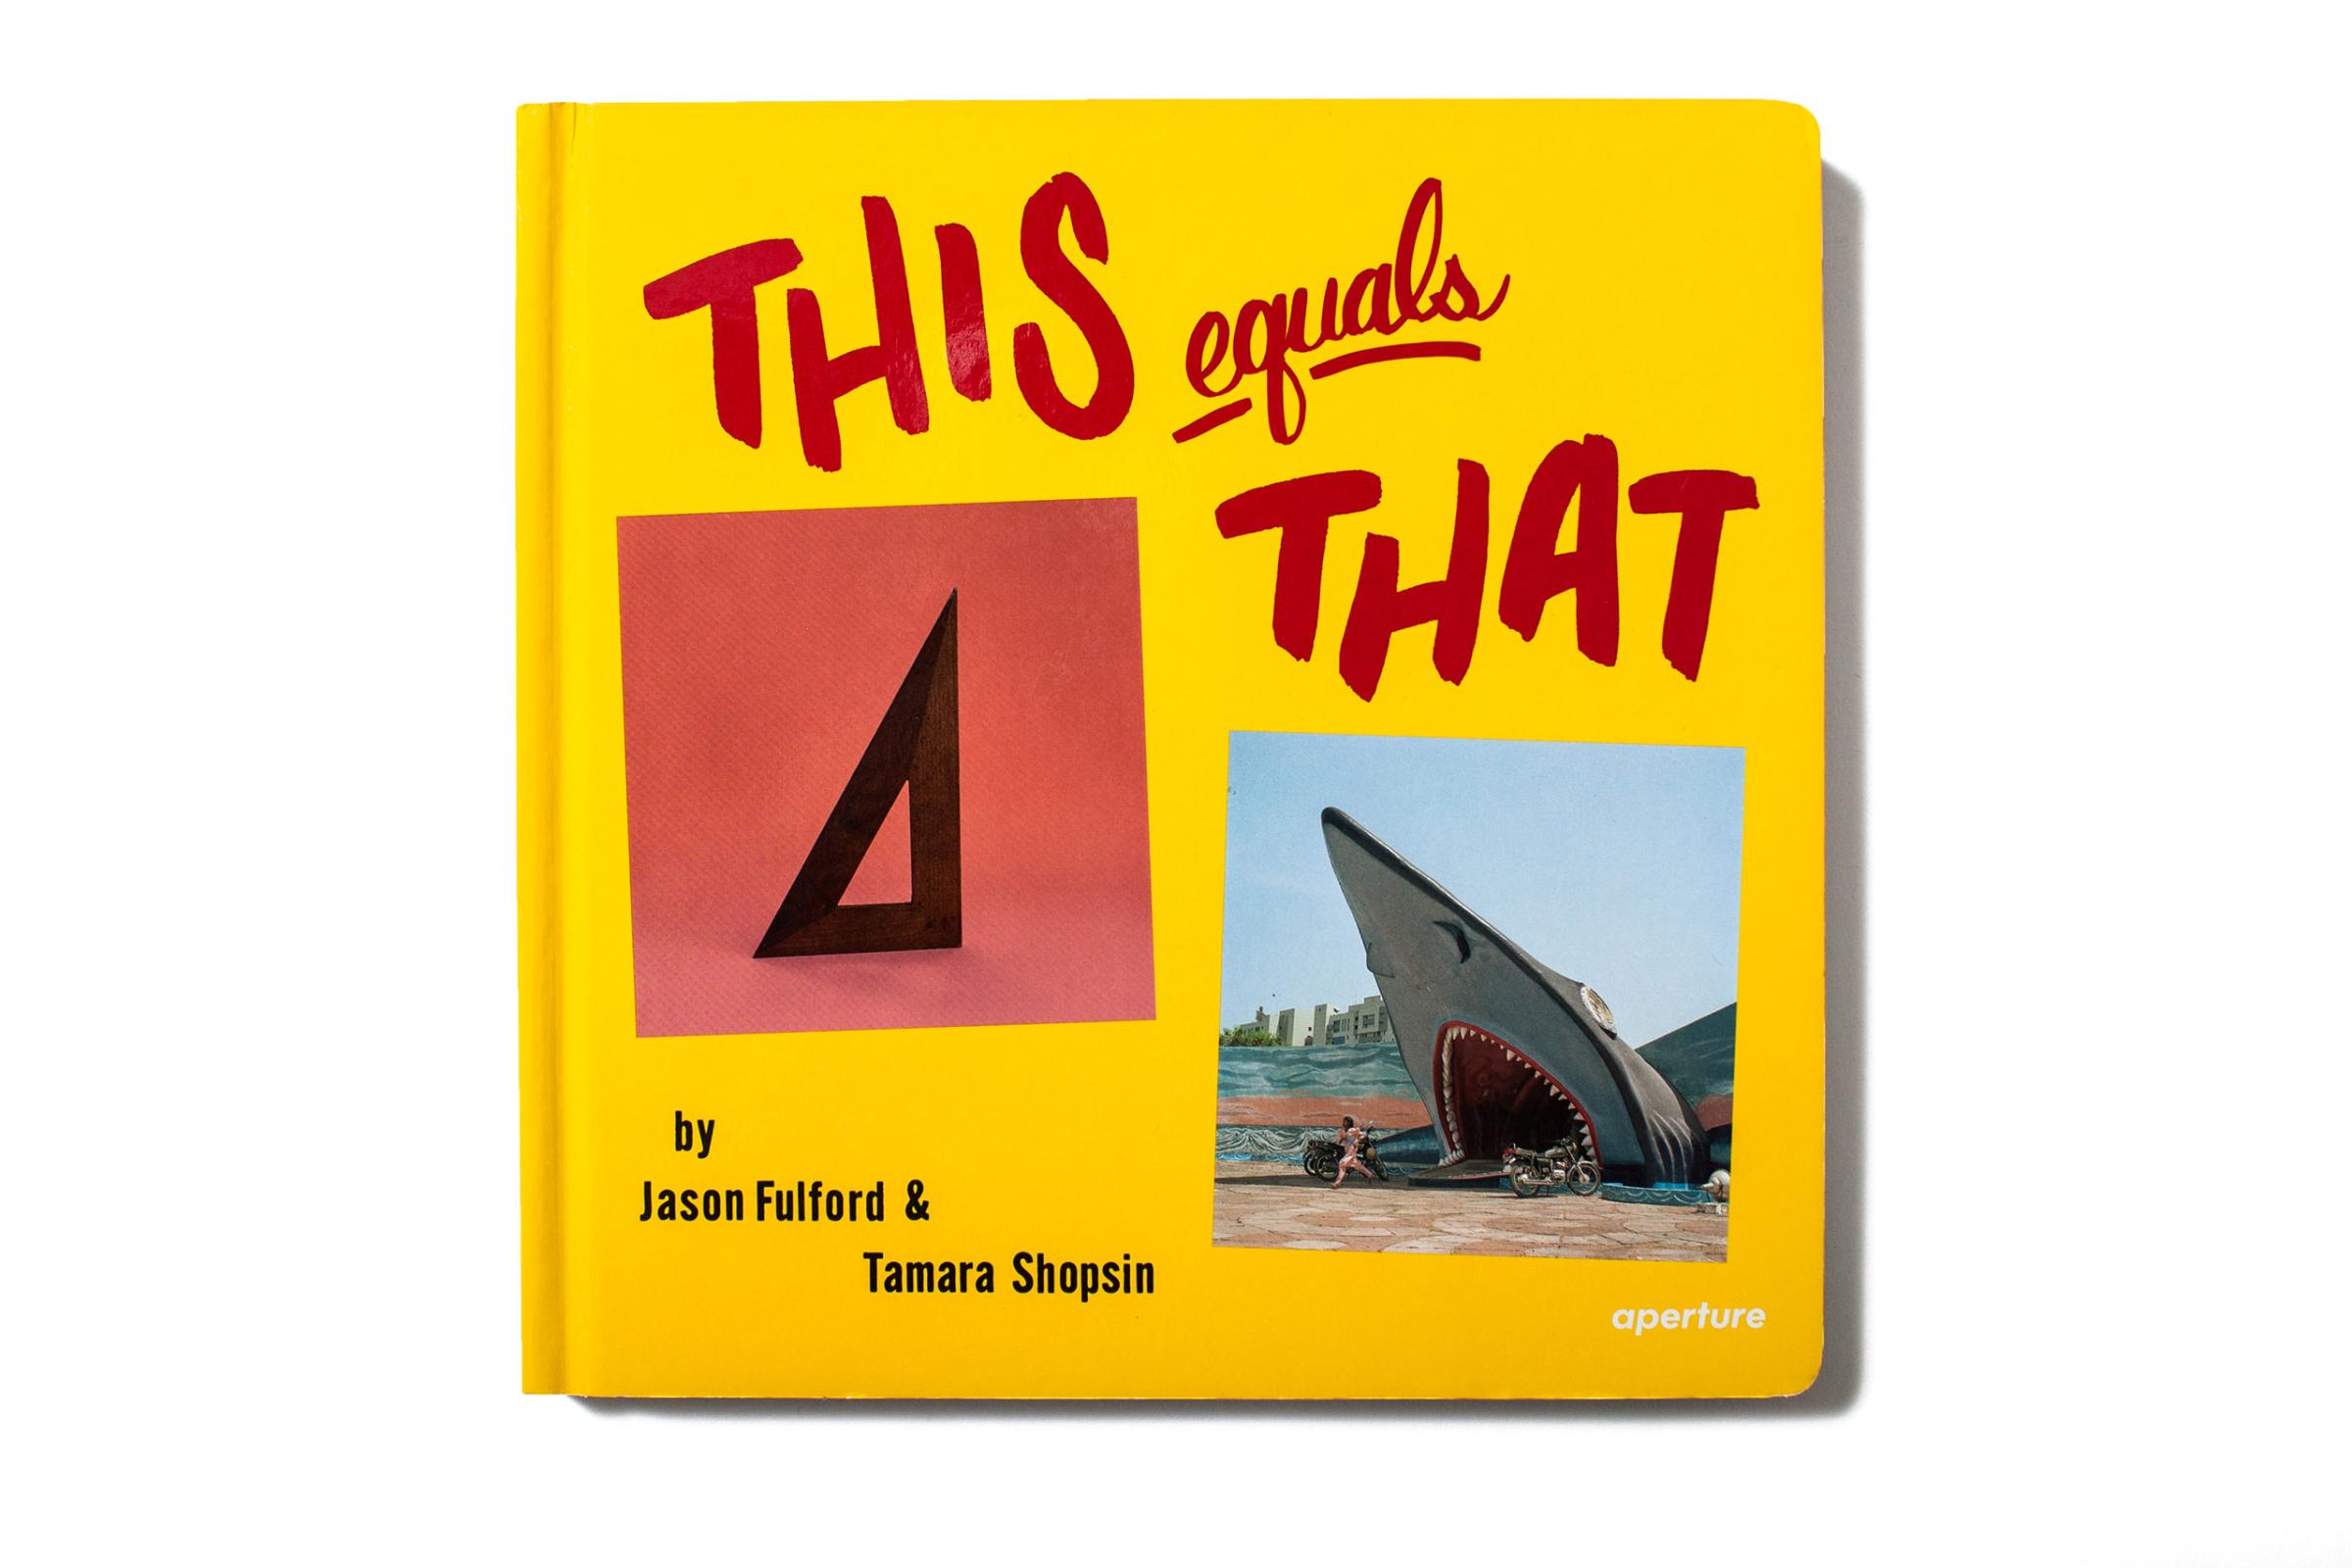 This Equals That by Jason Fulford and Tamara Shopsin, published byAperture, selected by Aaron Schuman, photographer, writer, curator, and the editor of SeeSaw Magazine (seesawmagazine.com).